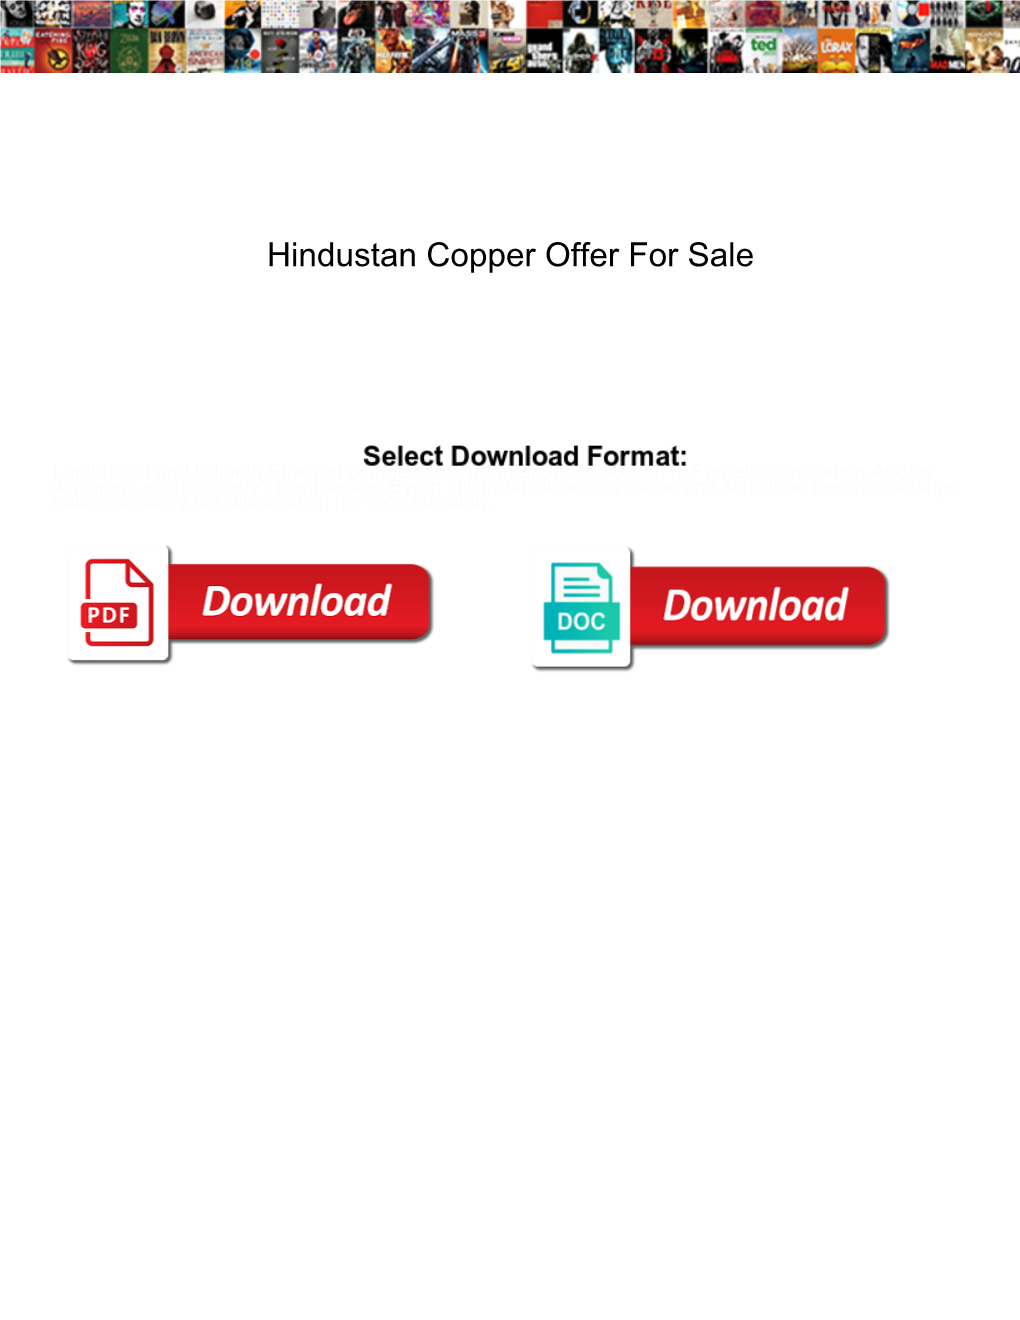 Hindustan Copper Offer for Sale